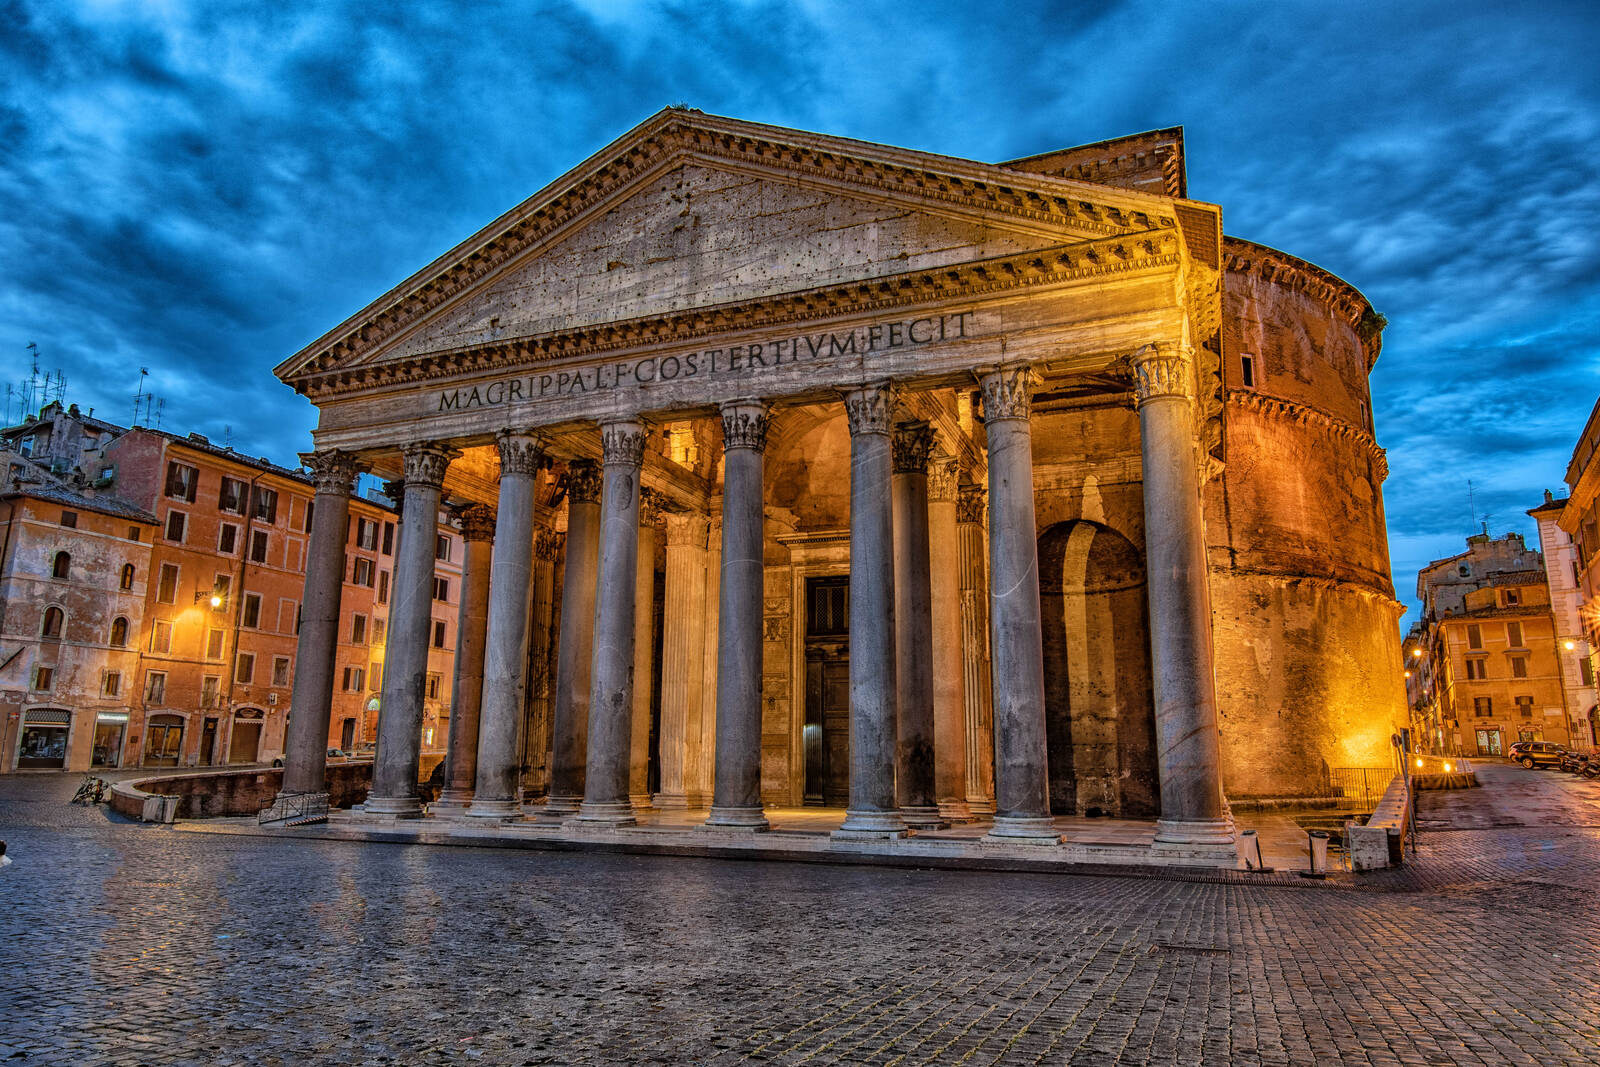 Image of Pantheon by Guy Bostijn